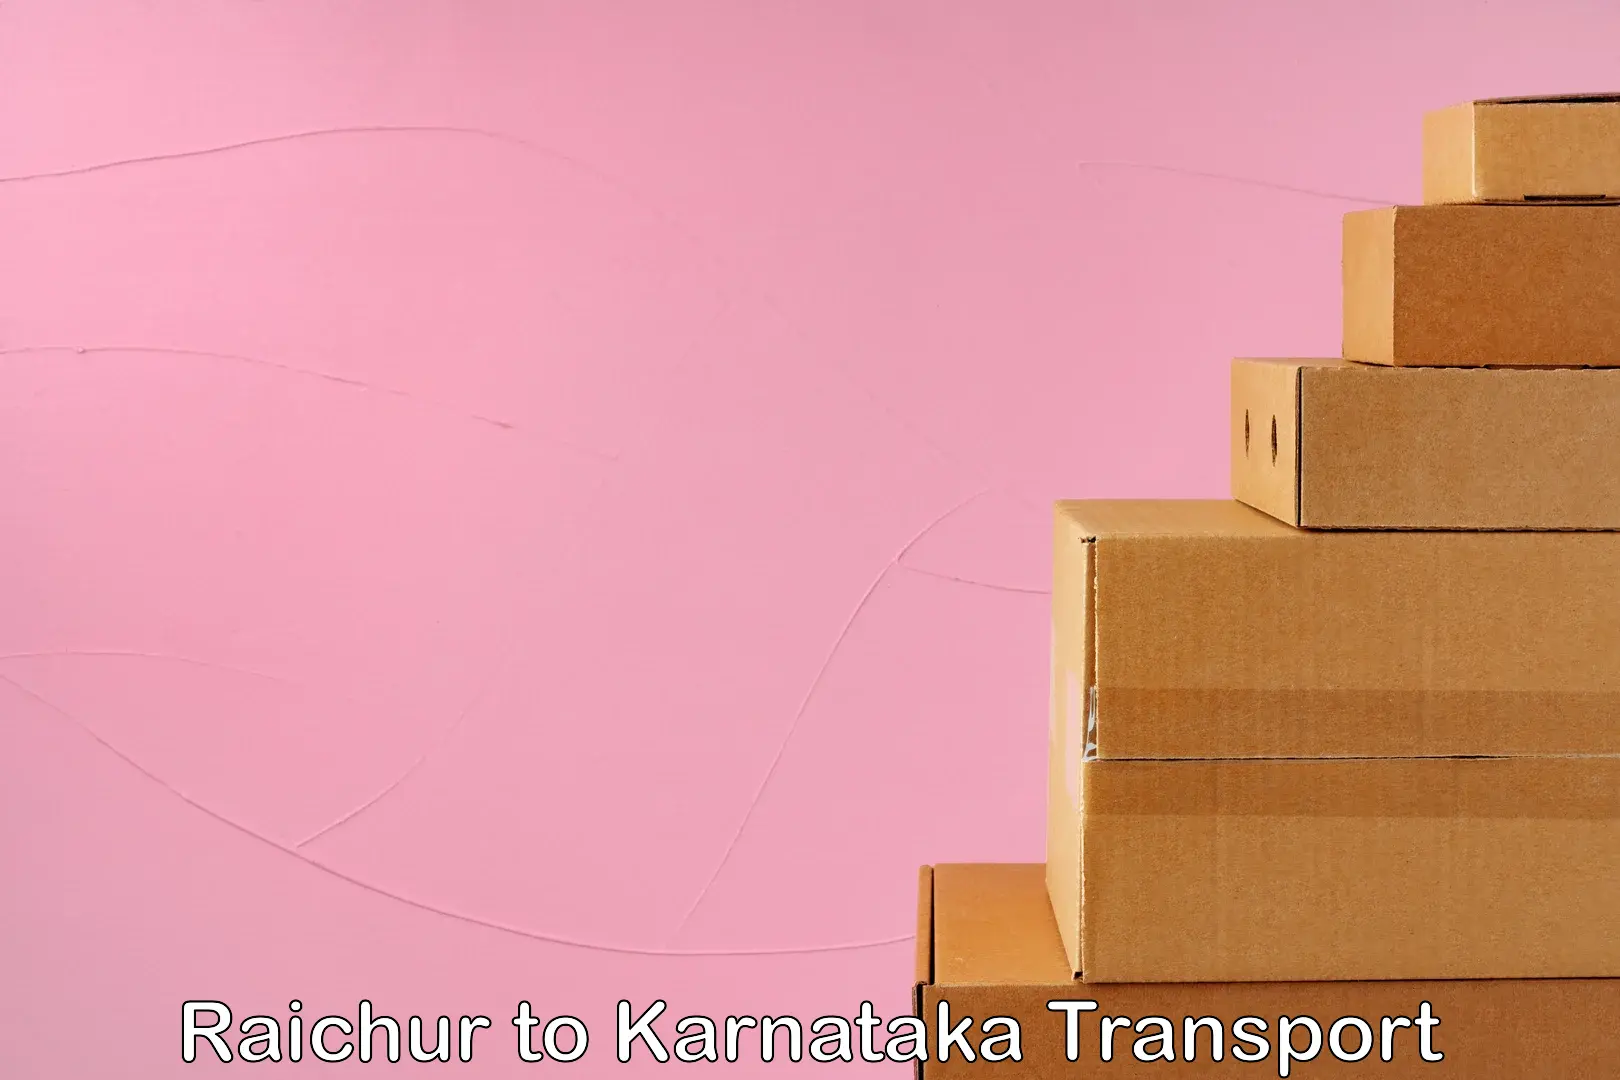 Domestic goods transportation services in Raichur to Chikmagalur